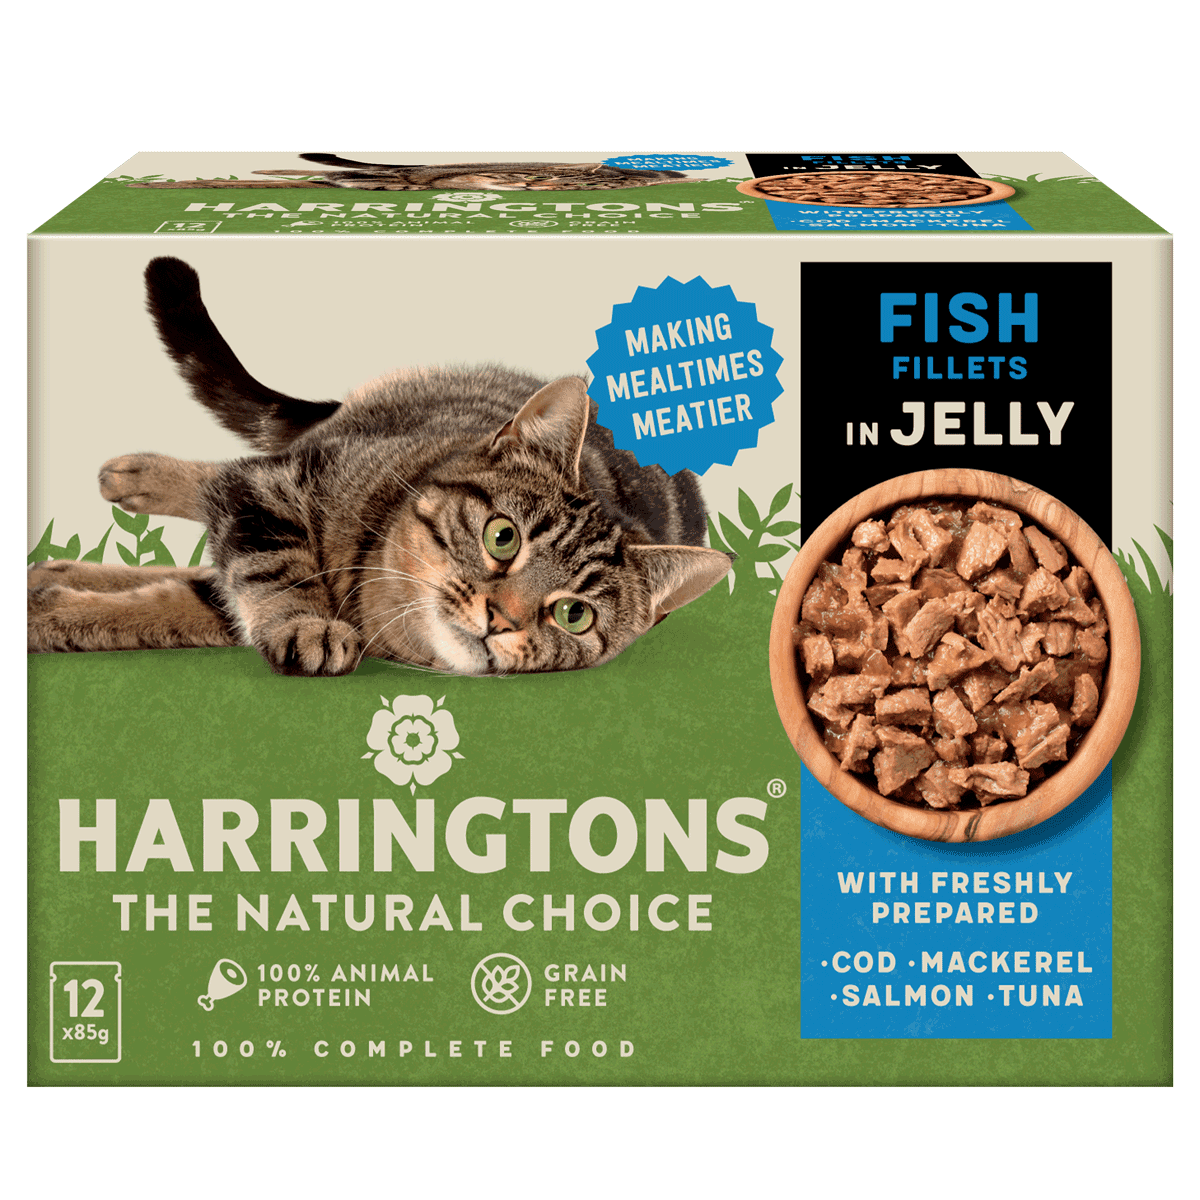 Fish in Jelly Wet Cat Food - Pack of 12